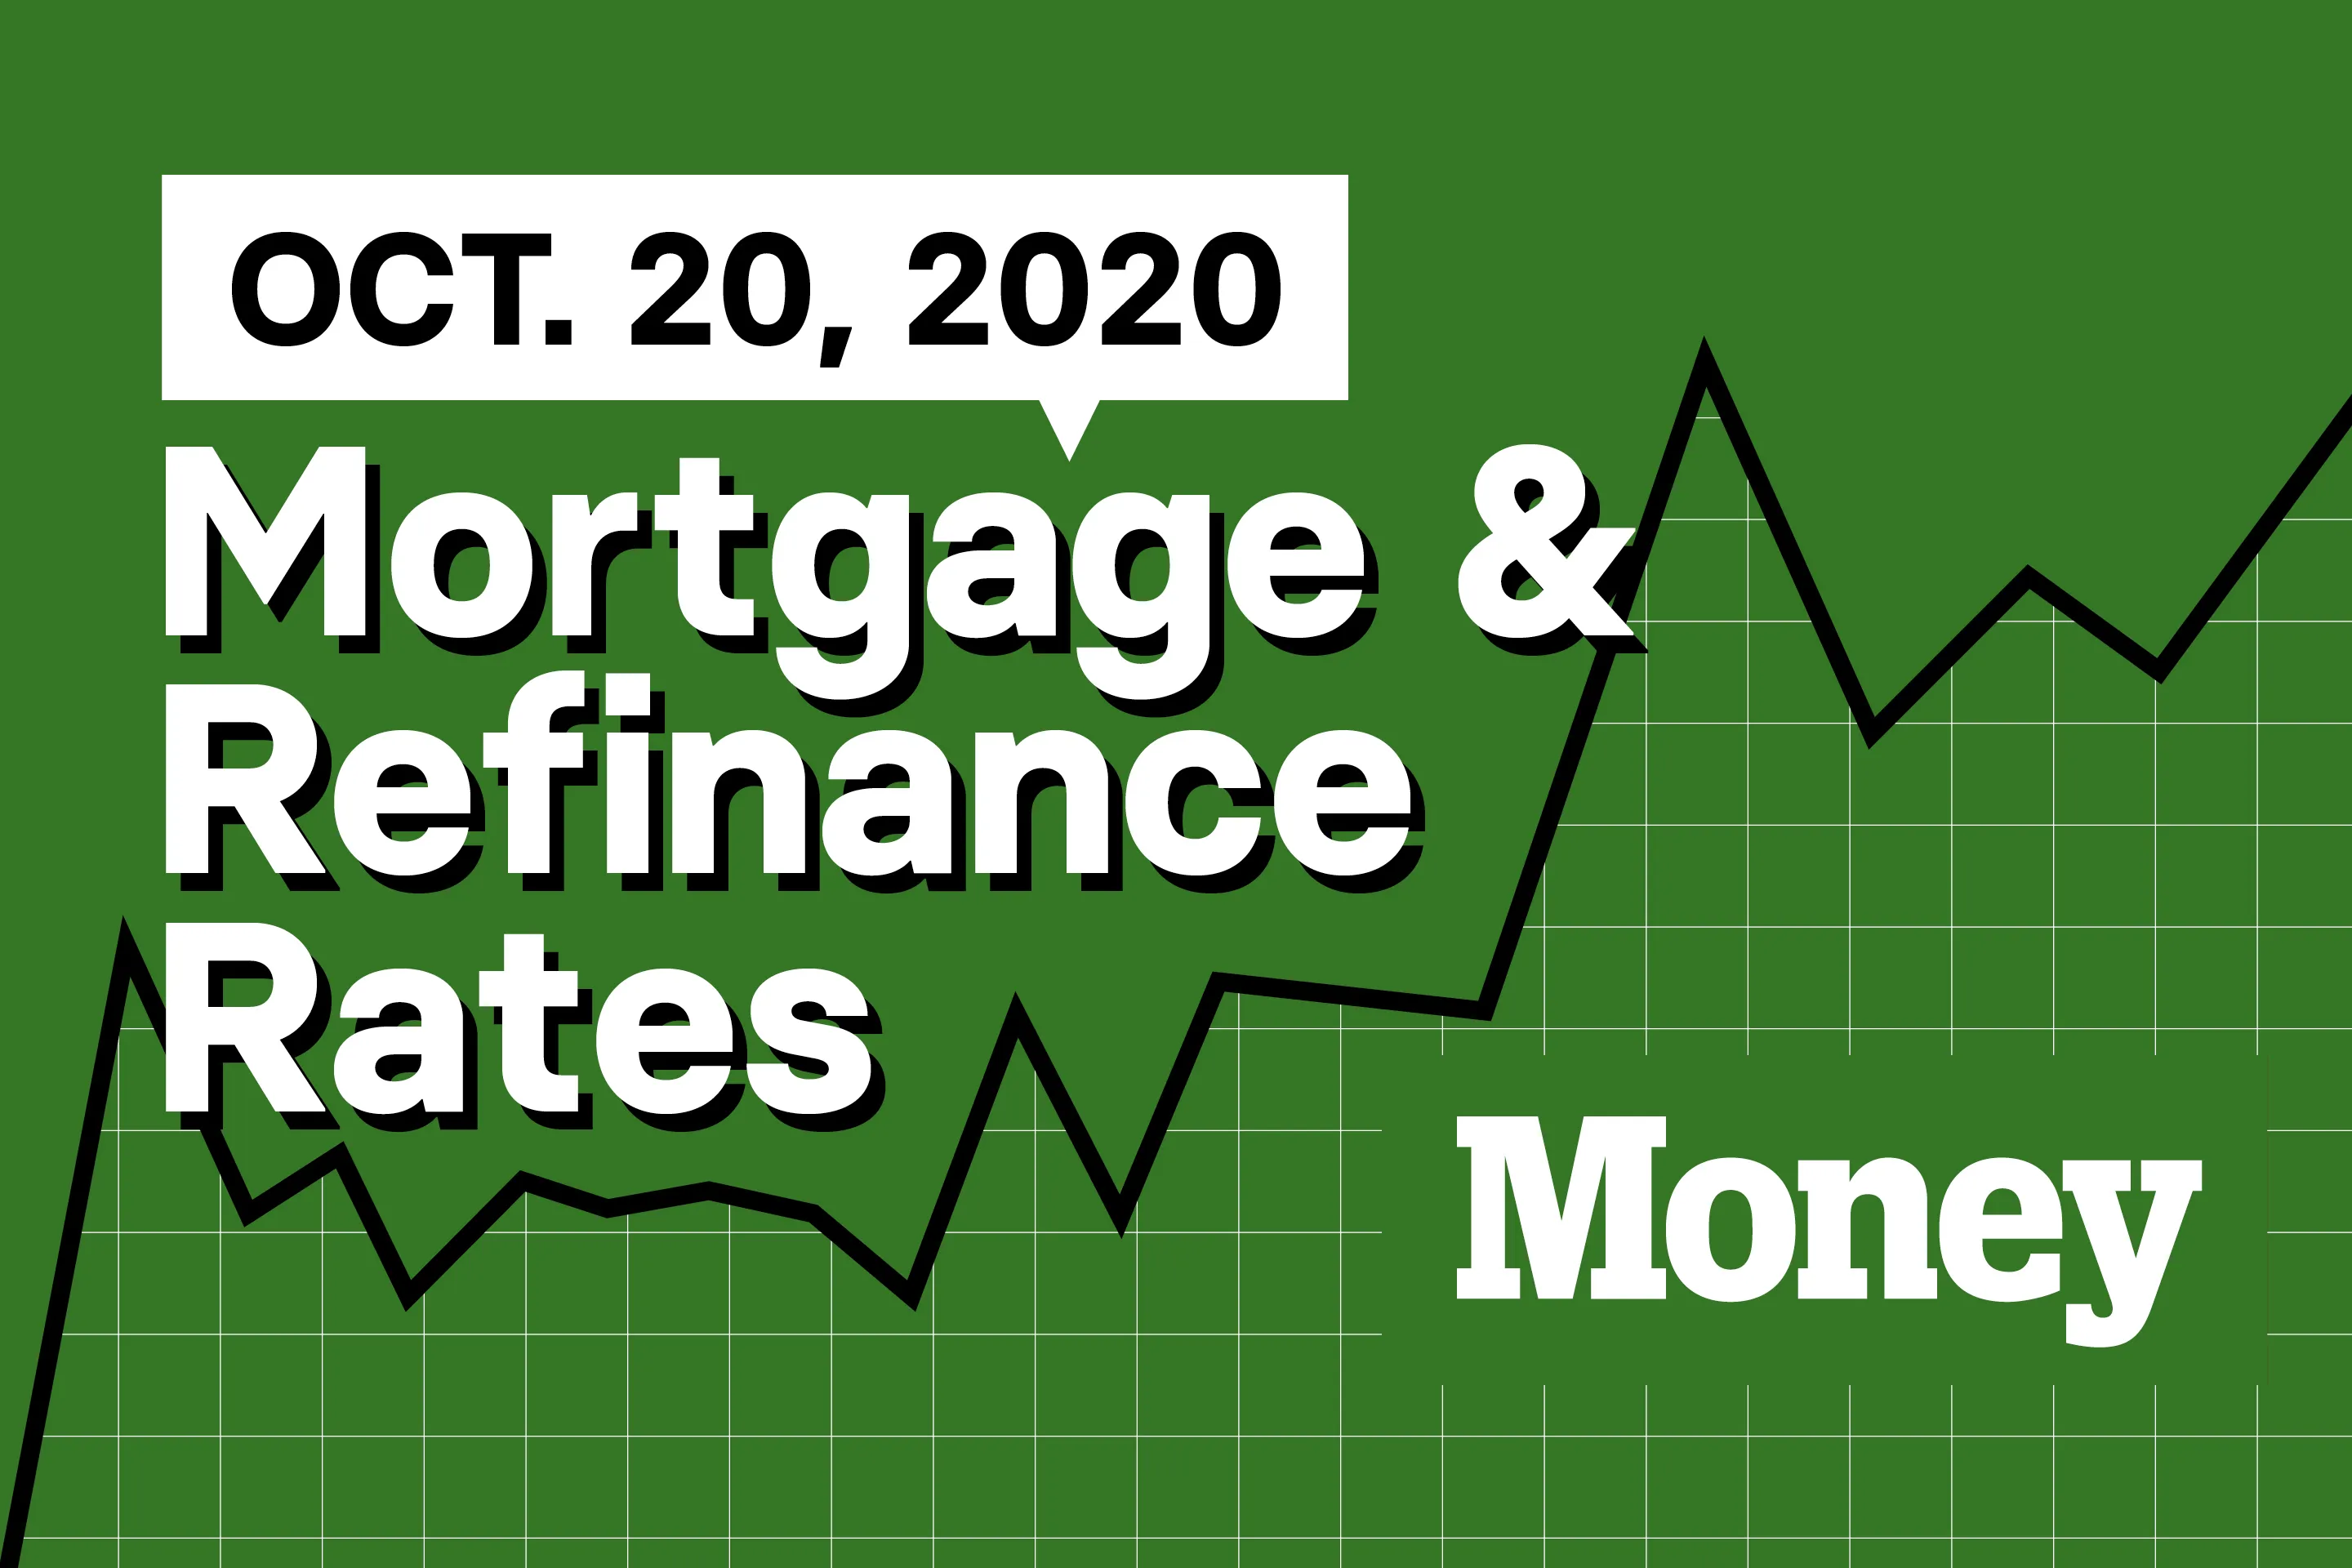 Here Are Today's Best Mortgage & Refinance Rates for October 20, 2020